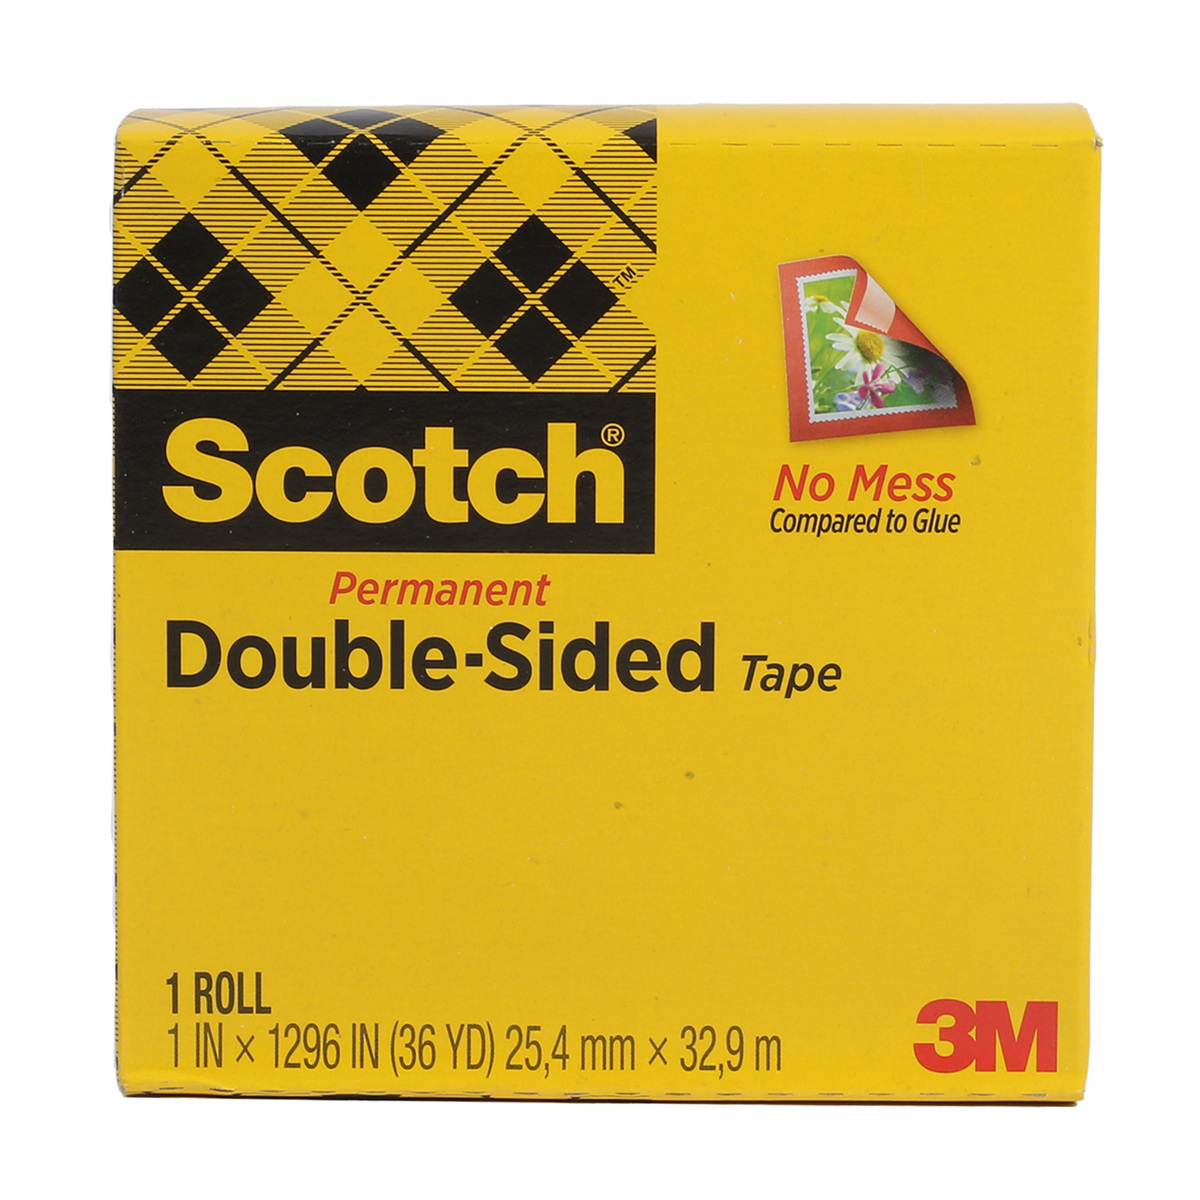 3M Double-Sided Tape 36YD